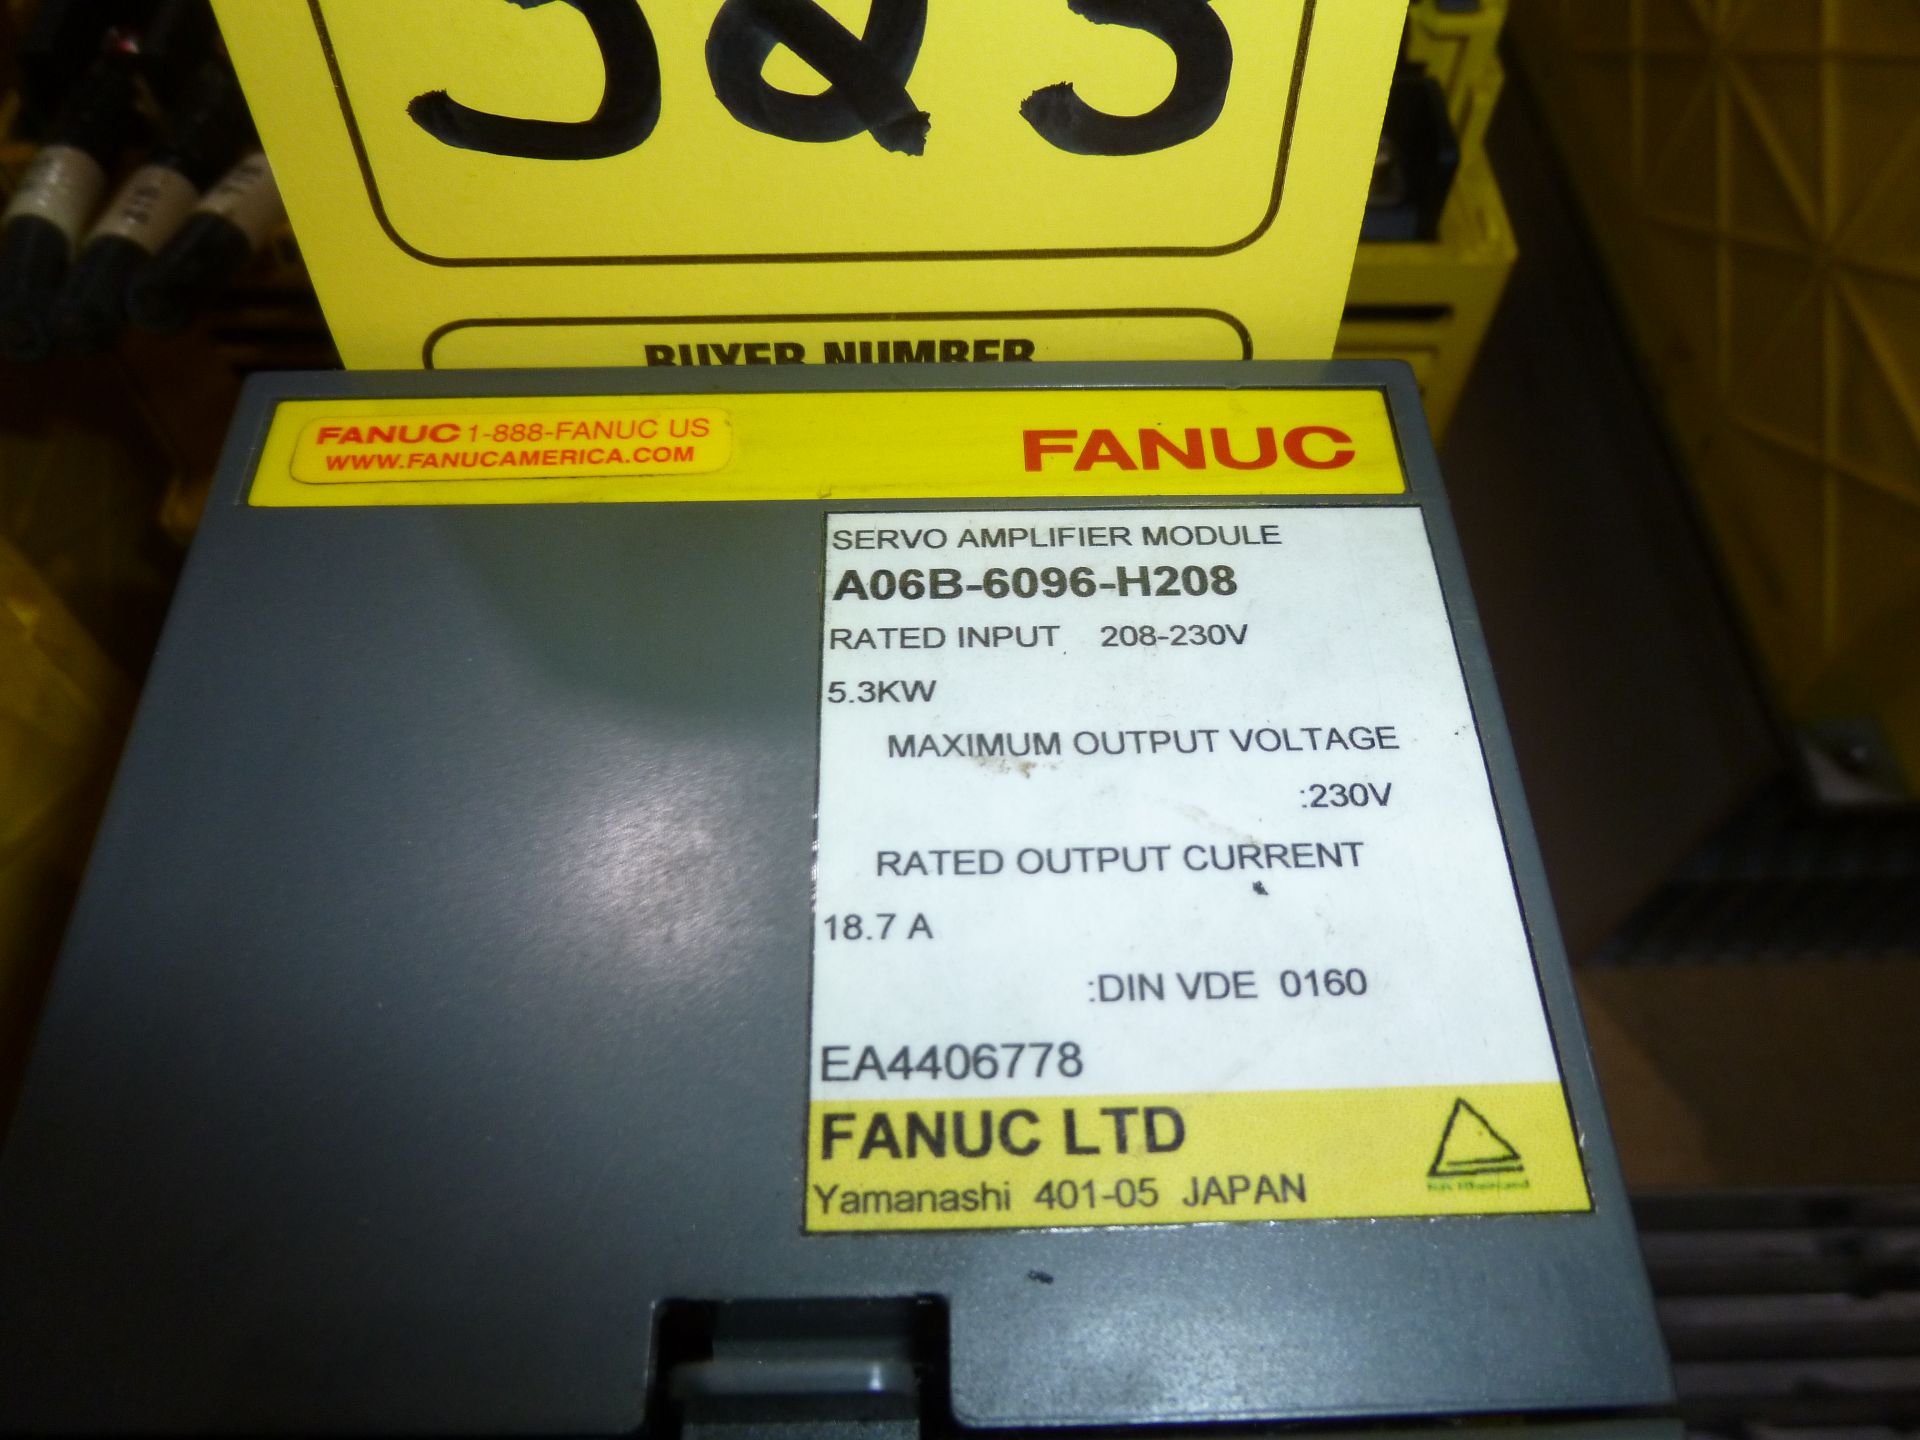 Fanuc servo amplifier module model A06B-6096-H208, as always with Brolyn LLC auctions, all lots - Image 2 of 2